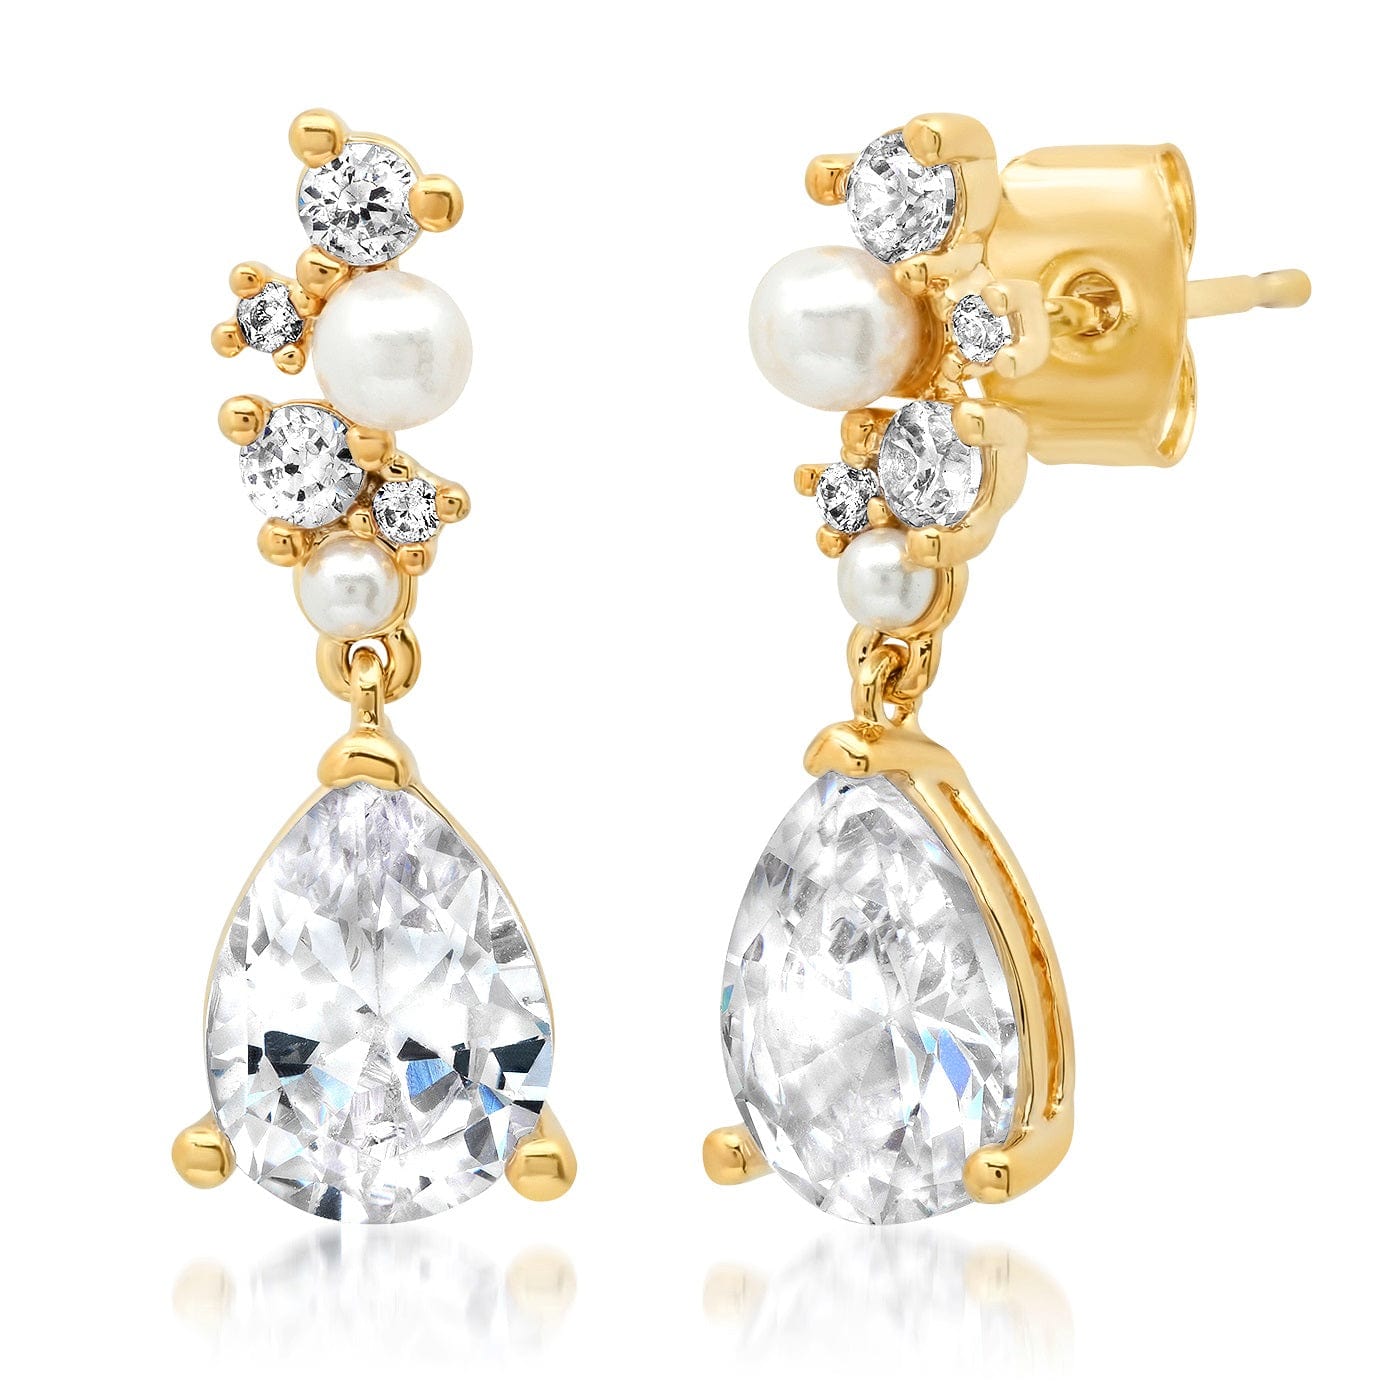 TAI JEWELRY Earrings Cz And Pearl Cluster With Tear Drop Dangle